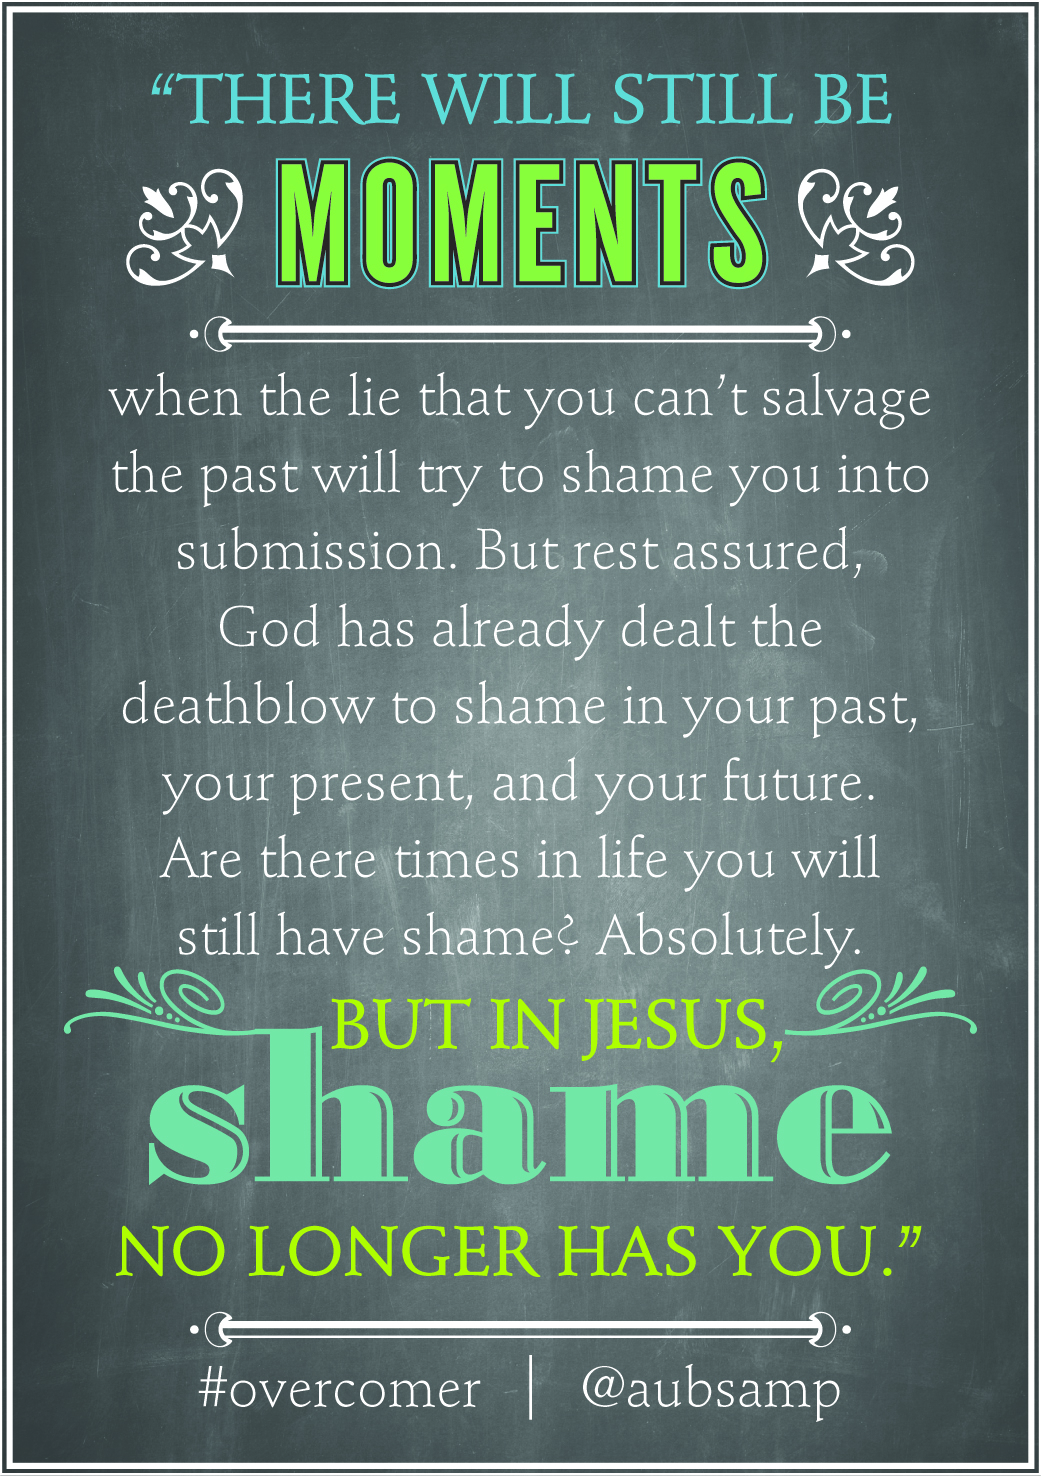 But in Jesus, Shame no longer has you